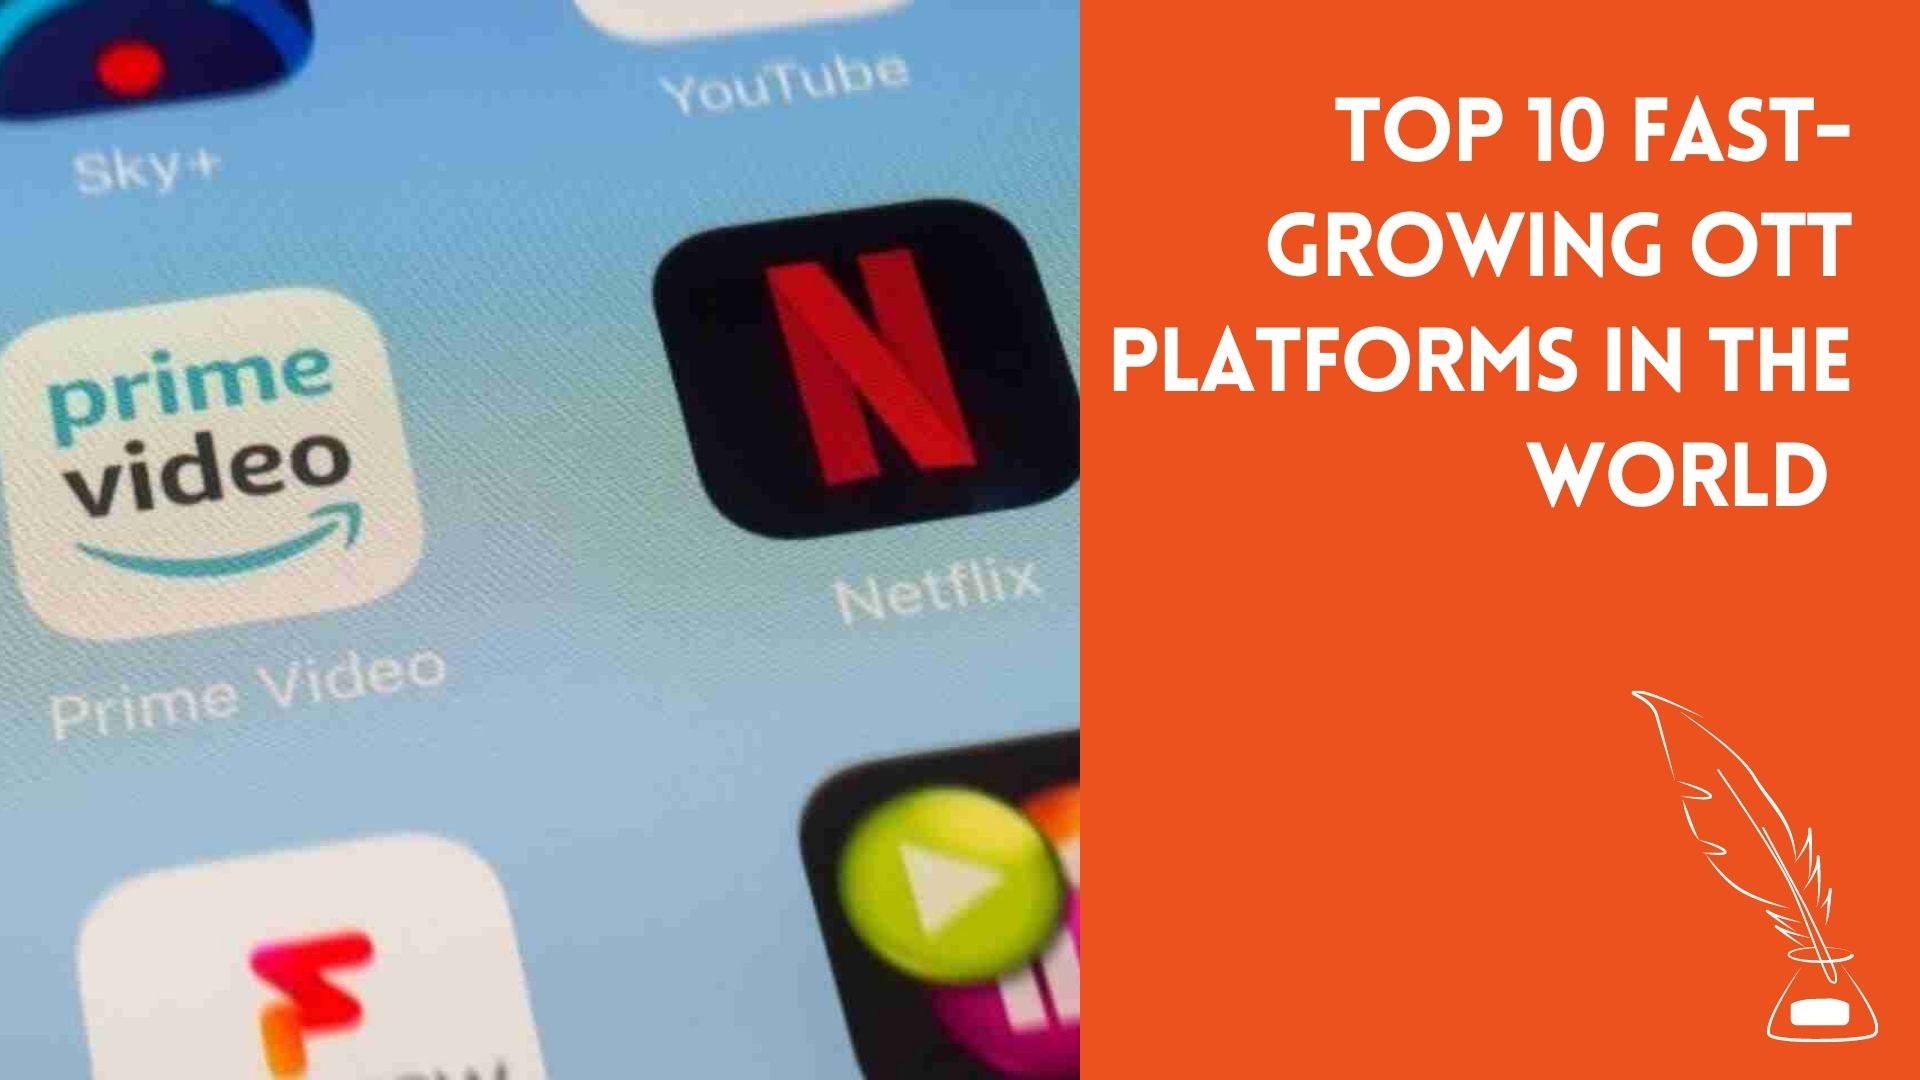 Top 10 Fast-Growing OTT Platforms in the World